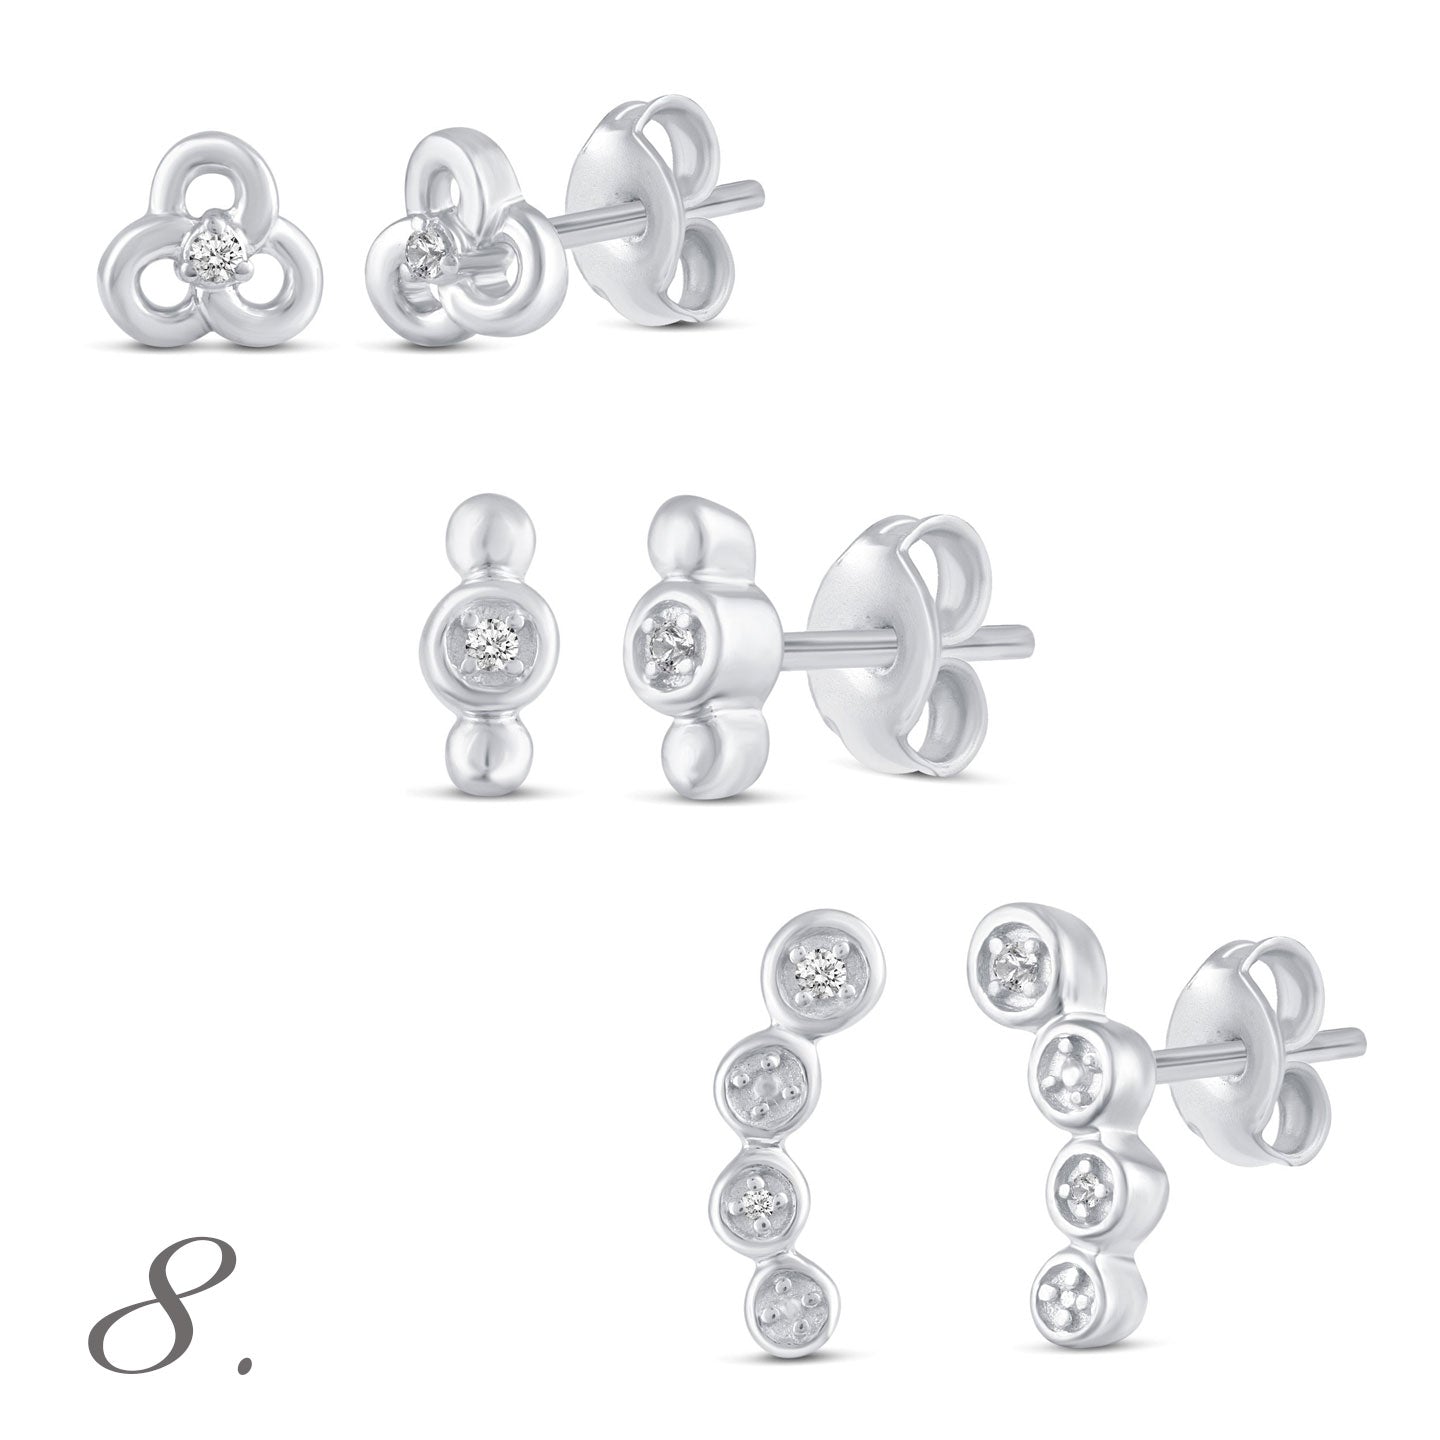 3 Pairs Set Ear Party 1/10 -1/20 Cttw Natural Diamond Earrings in 925 Sterling Silver clover beads